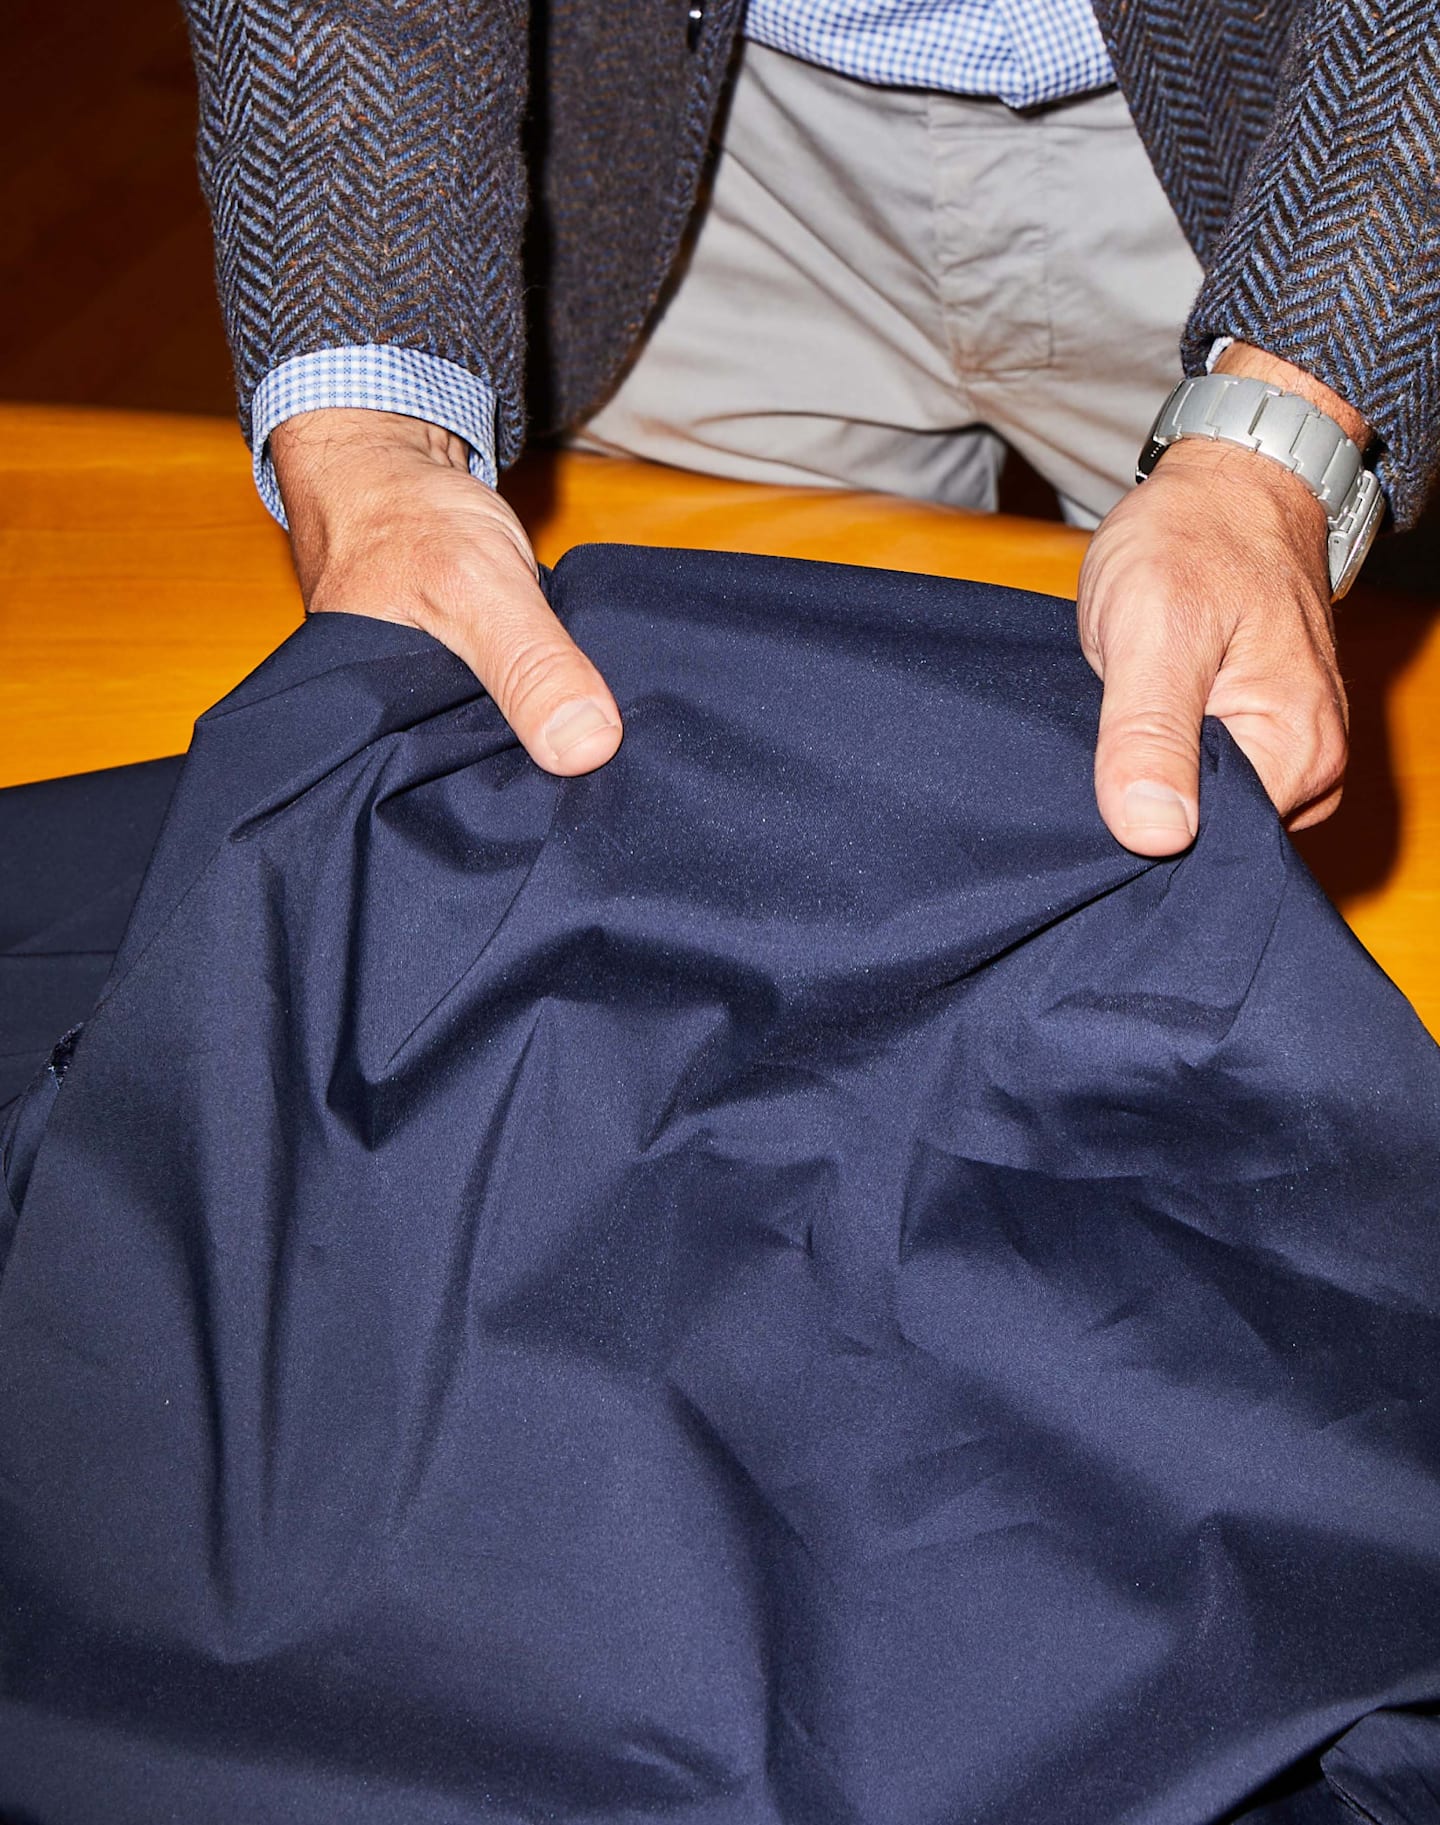 Fabrics are hand-inspected for quality and consistency.